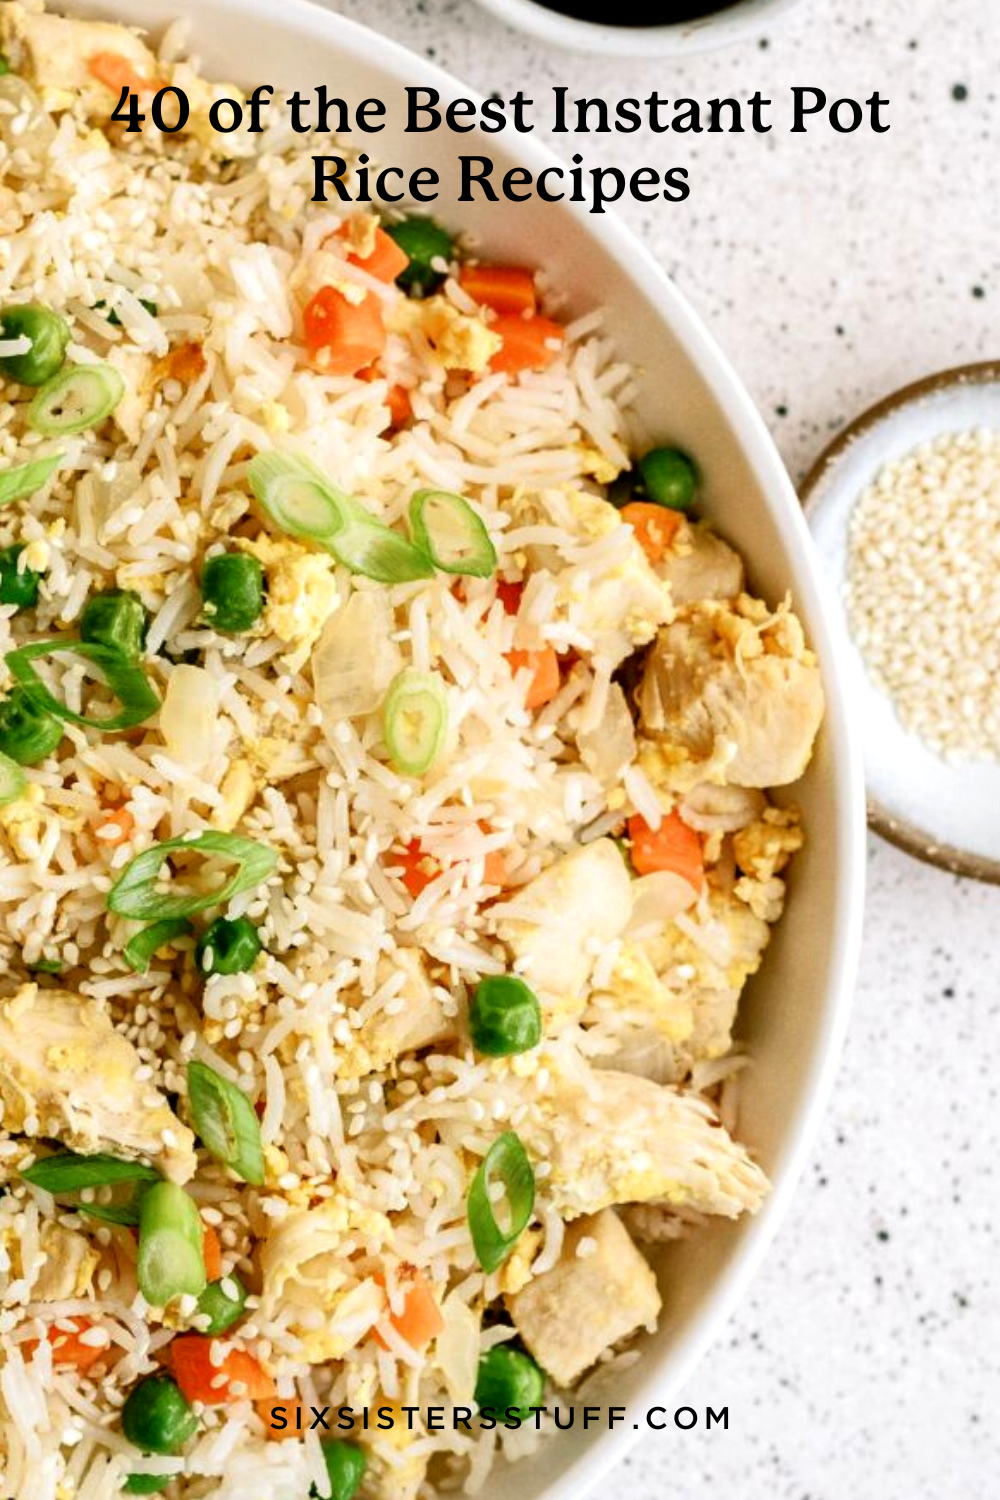 40 of the Best Instant Pot Rice Recipes